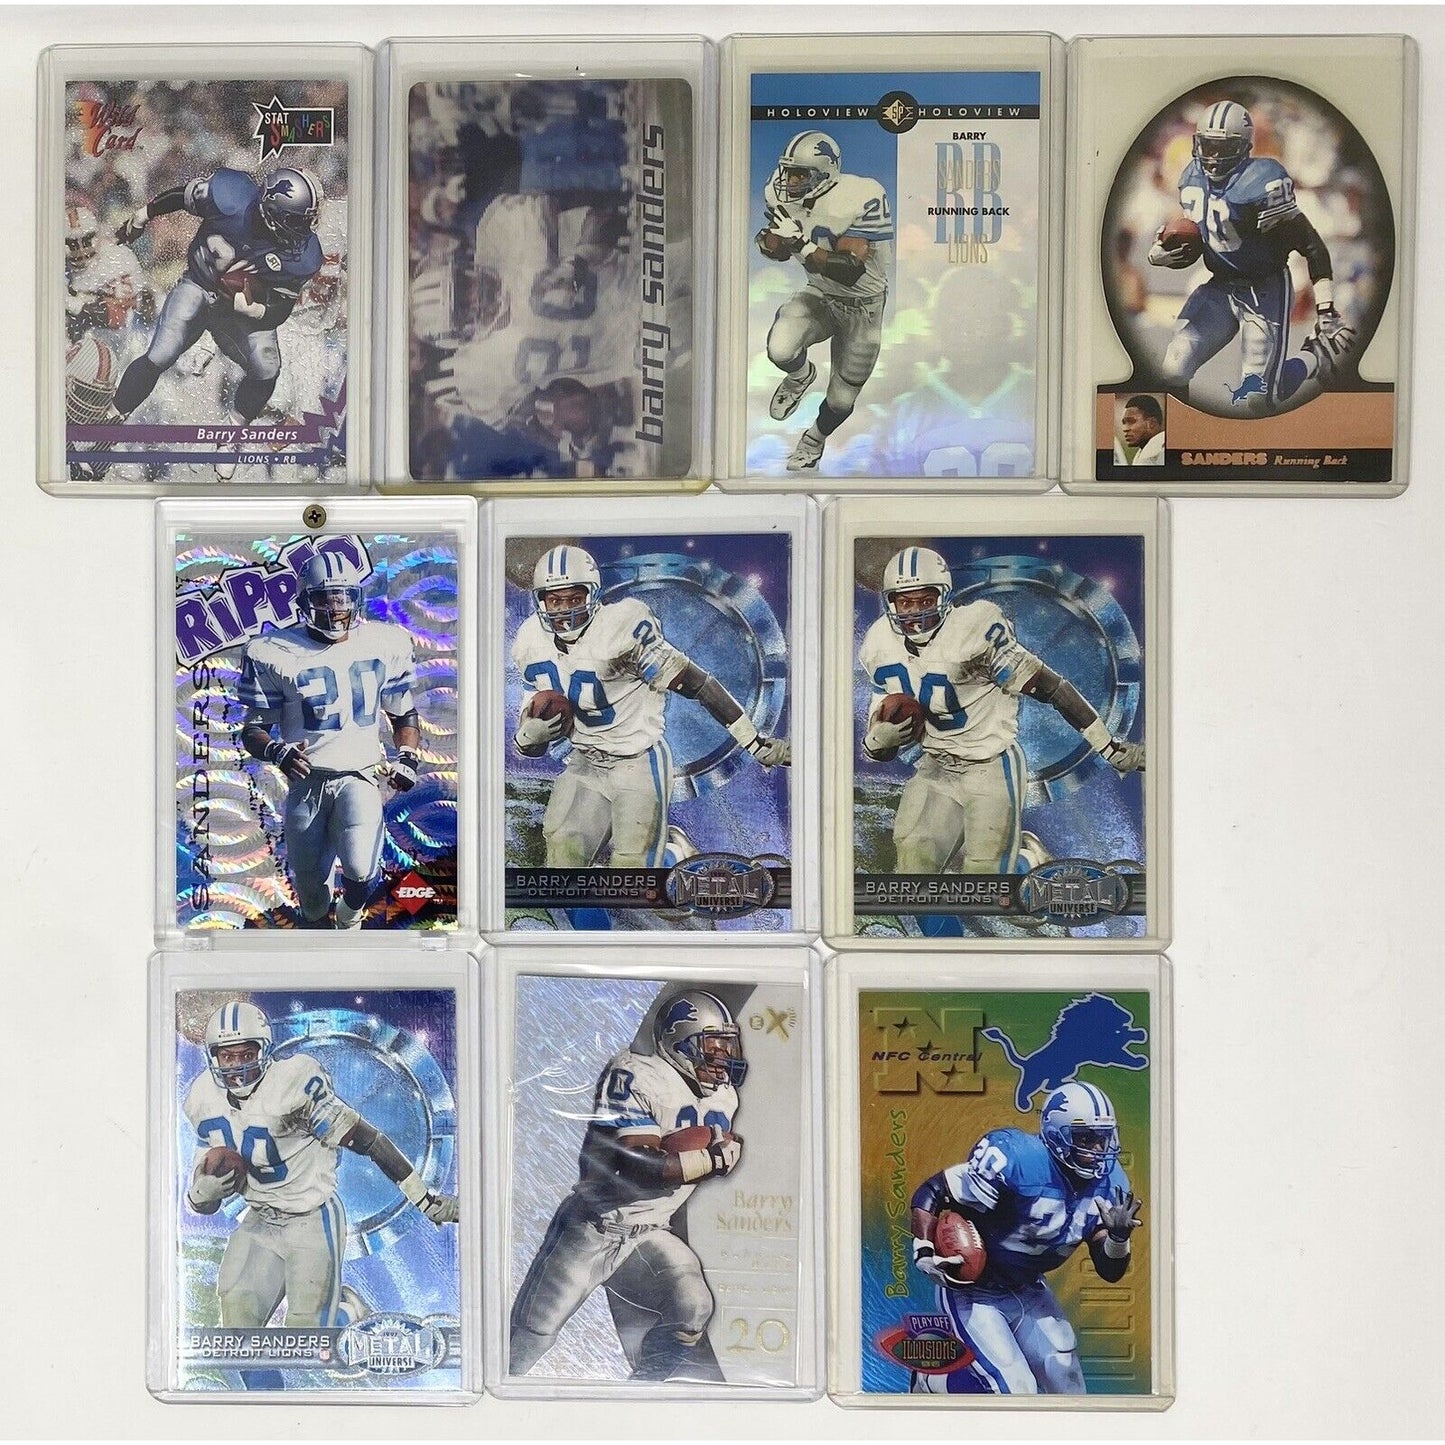 Mixed Lot of 21 Barry Sanders Lions Detroit Lions NFL Football Trading Cards